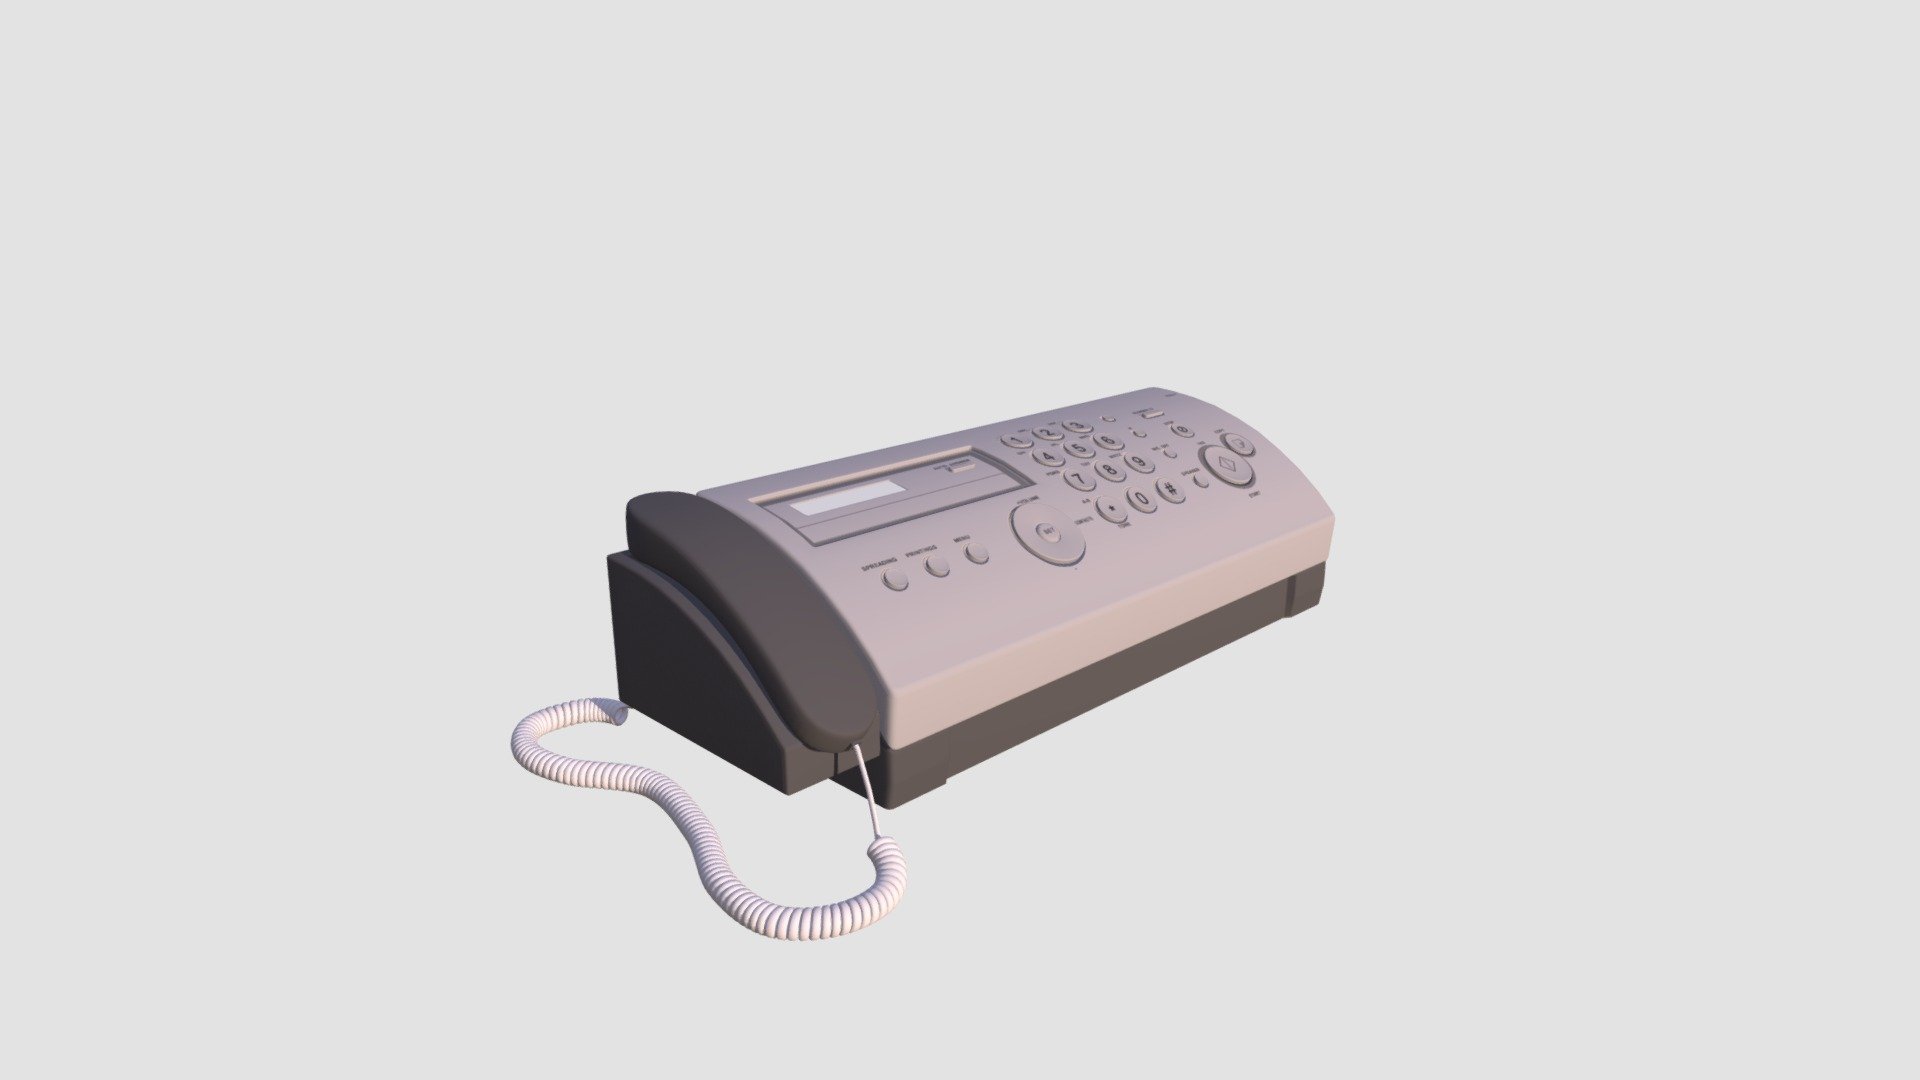 Highly detailed model of fax machine with all textures, shaders and materials. It is ready to use, just put it into your scene 3d model